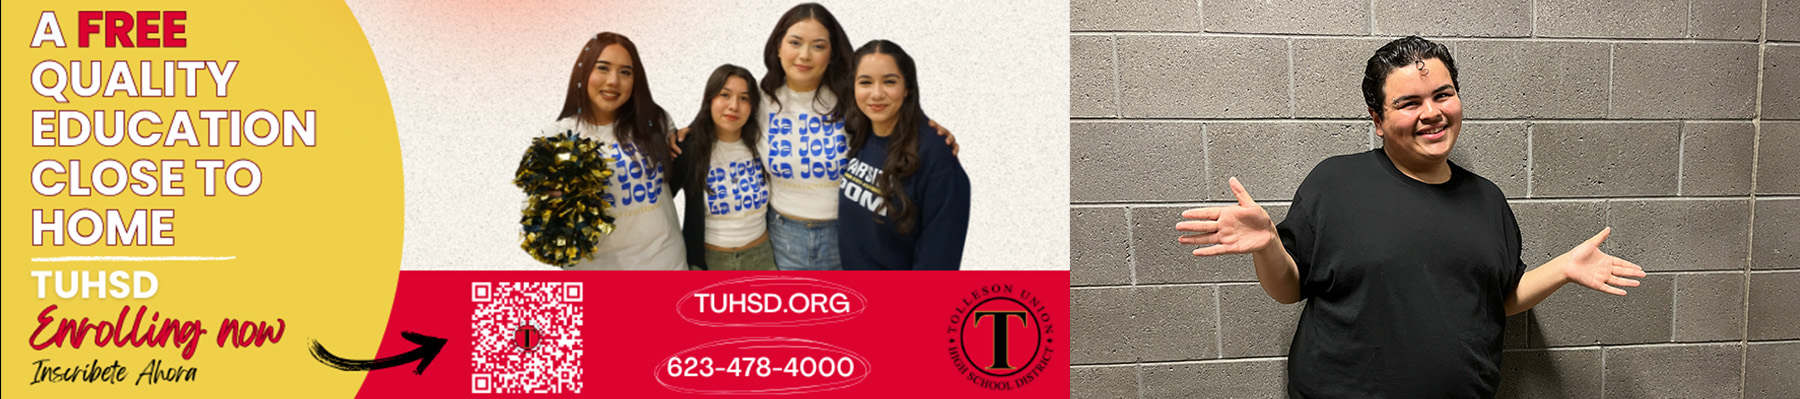 A free quality education close to home - TUHSD Enrolling now | Inscribete Ahora - tuhsd.org - 623-478-4000 | MV-22-osprey-lecture